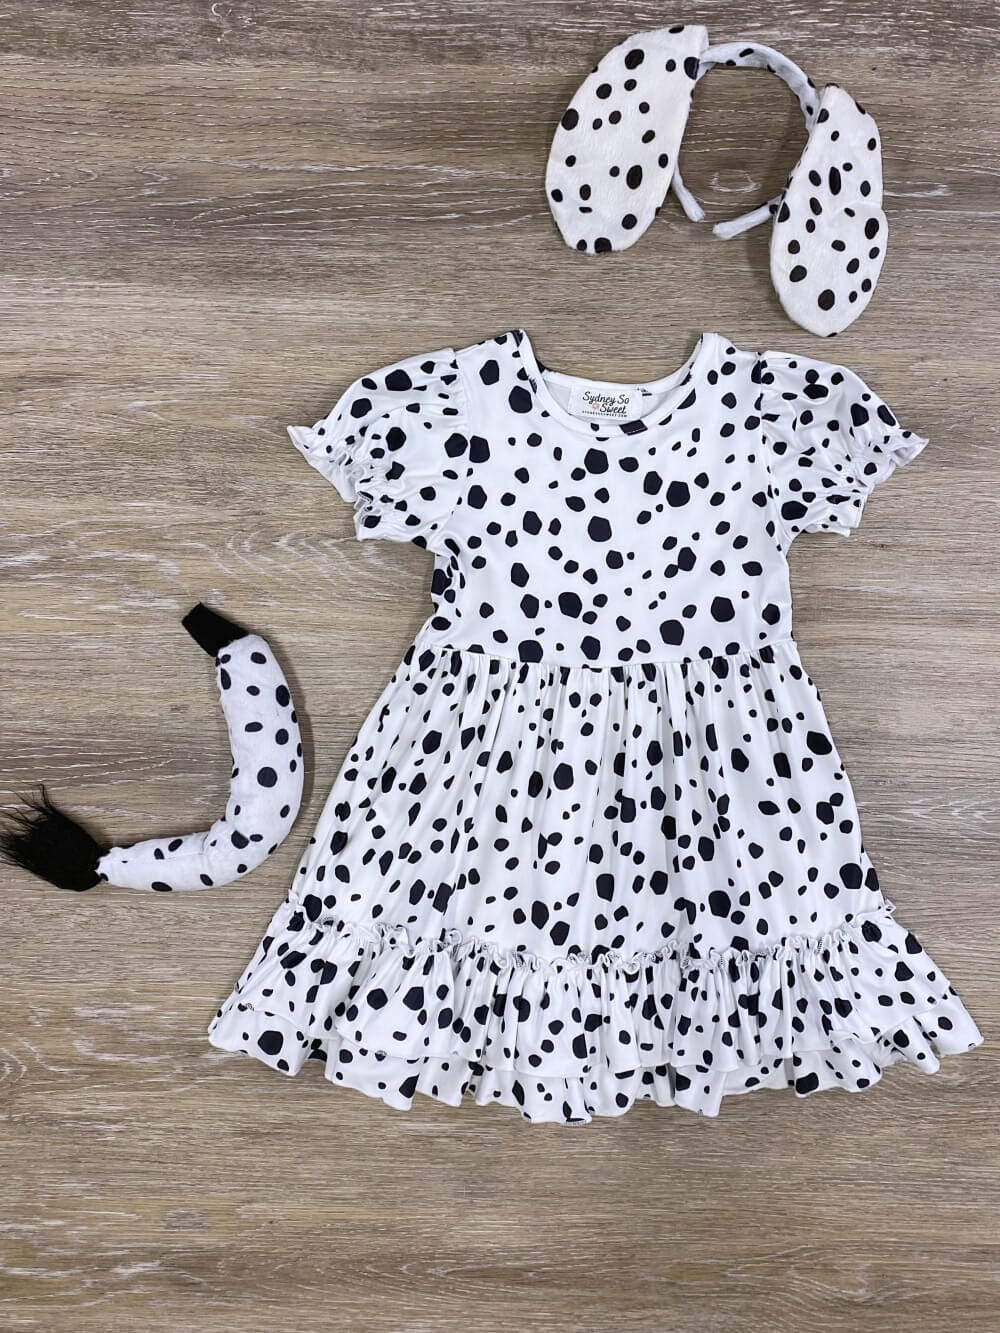 Puff Short Sleeve White & Black Girls Dalmatian Costume Dress with Tail & Ears - Sydney So Sweet